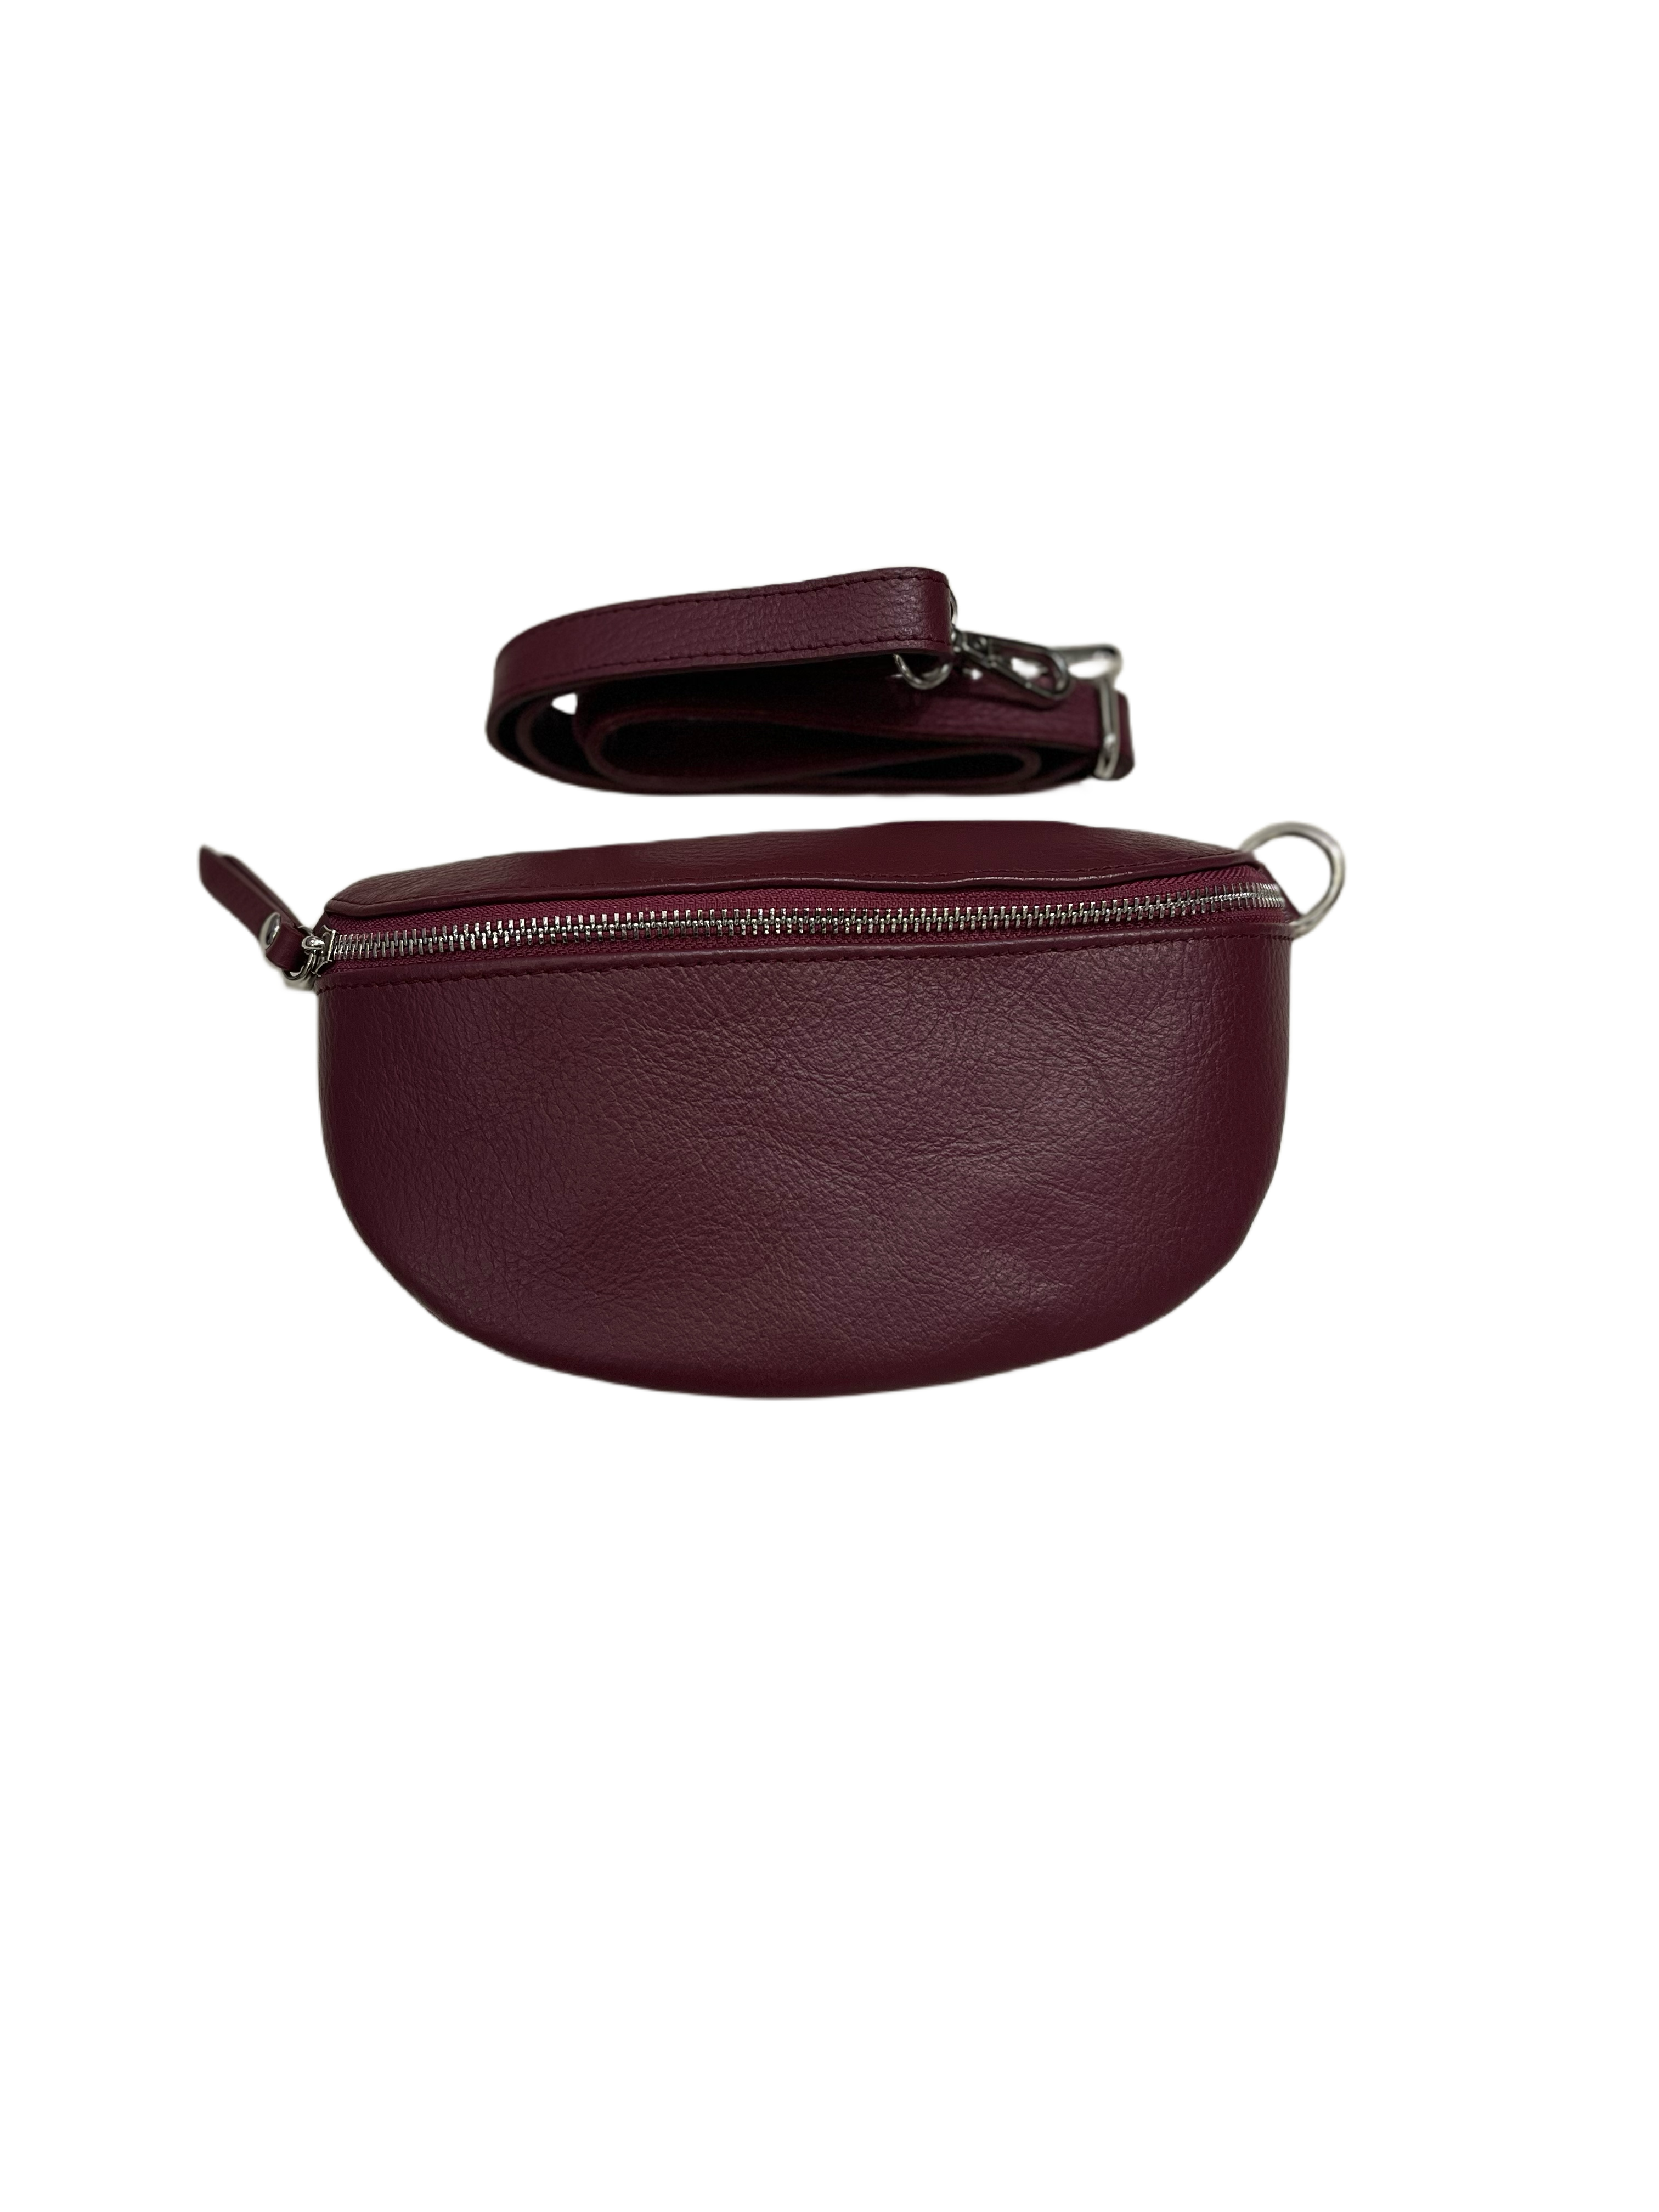 Bodella Bordeau genuine leather hip bag-made in Italy